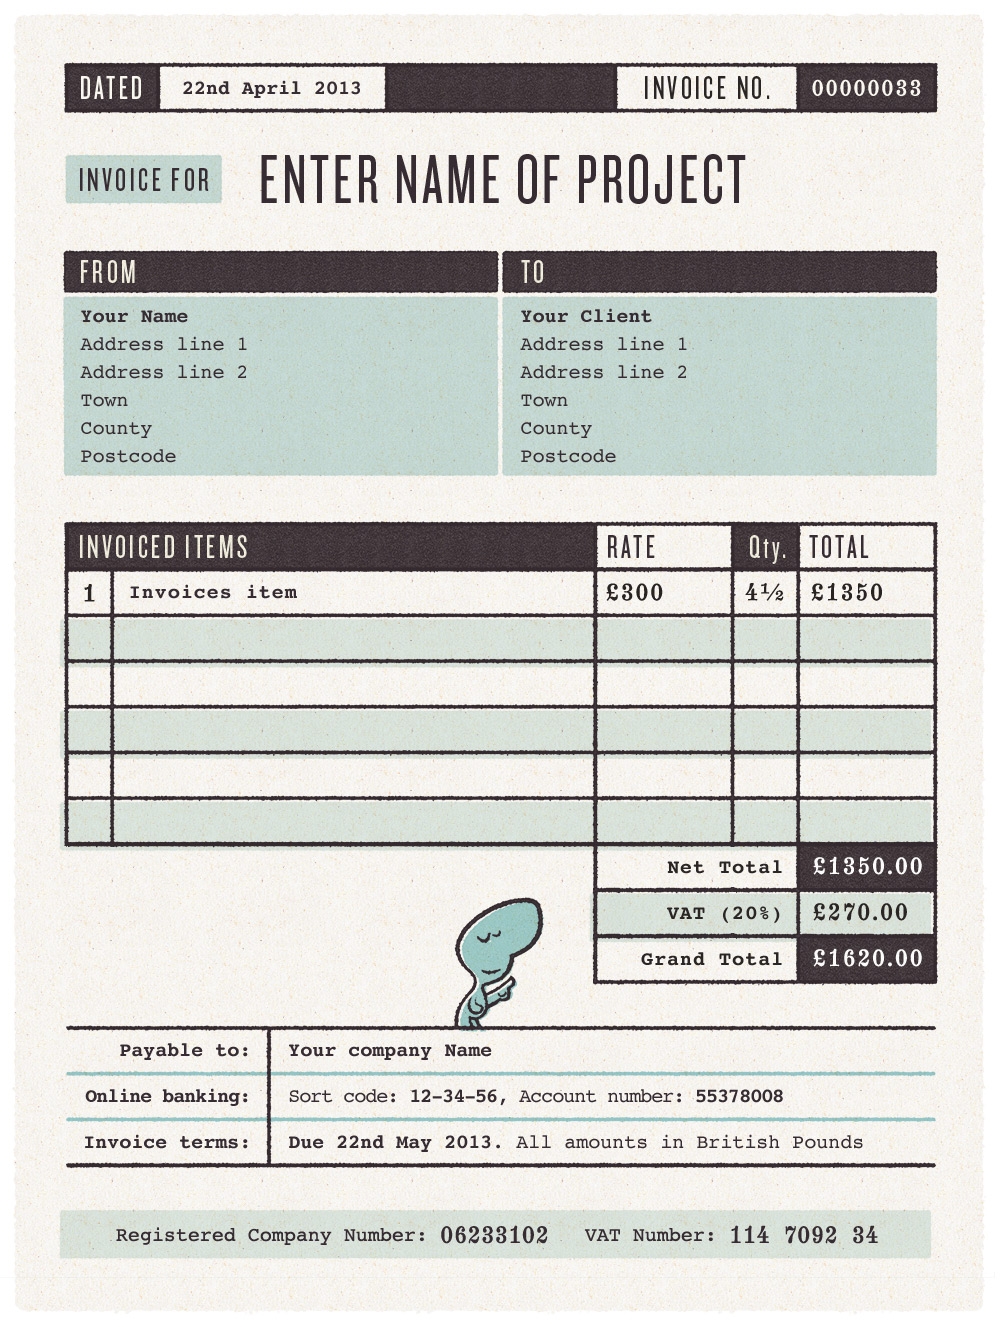 1000 images about design invoice on pinterest creative cool invoice template